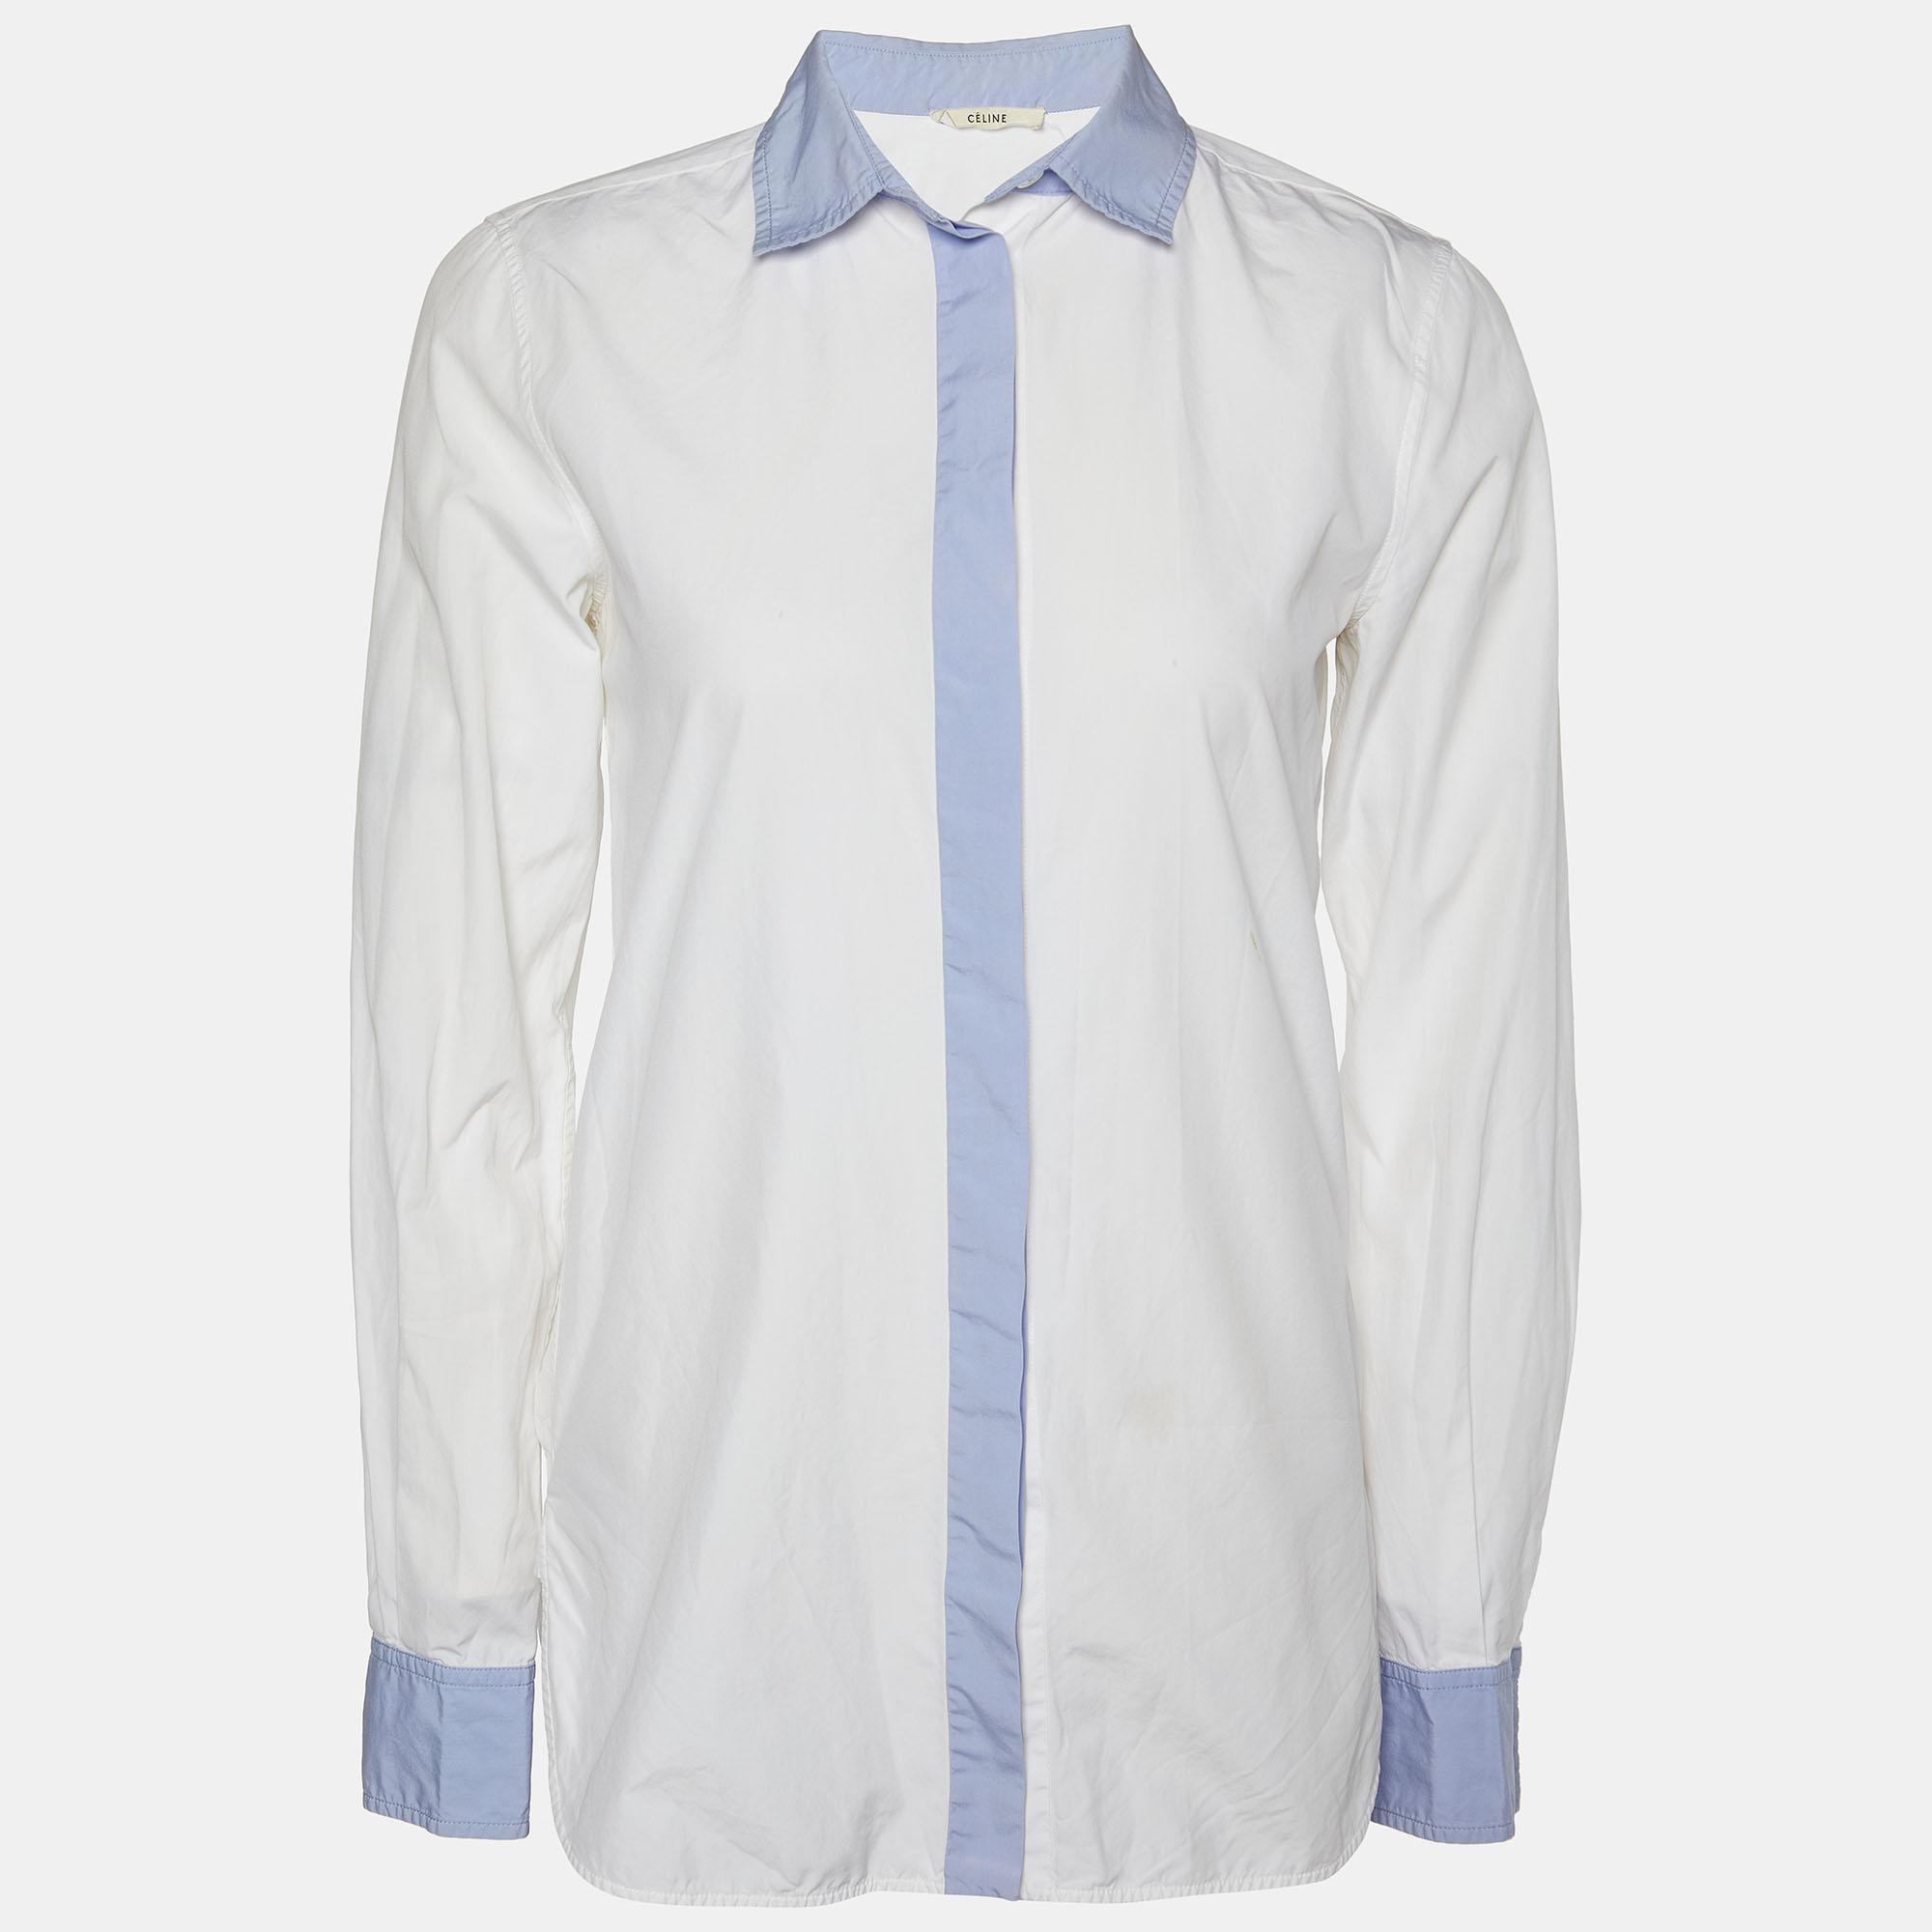 This Celine womens shirt is tailored using cotton fabric into a comfortable shape. It has a simple collar front buttons and long sleeves with buttoned cuffs.